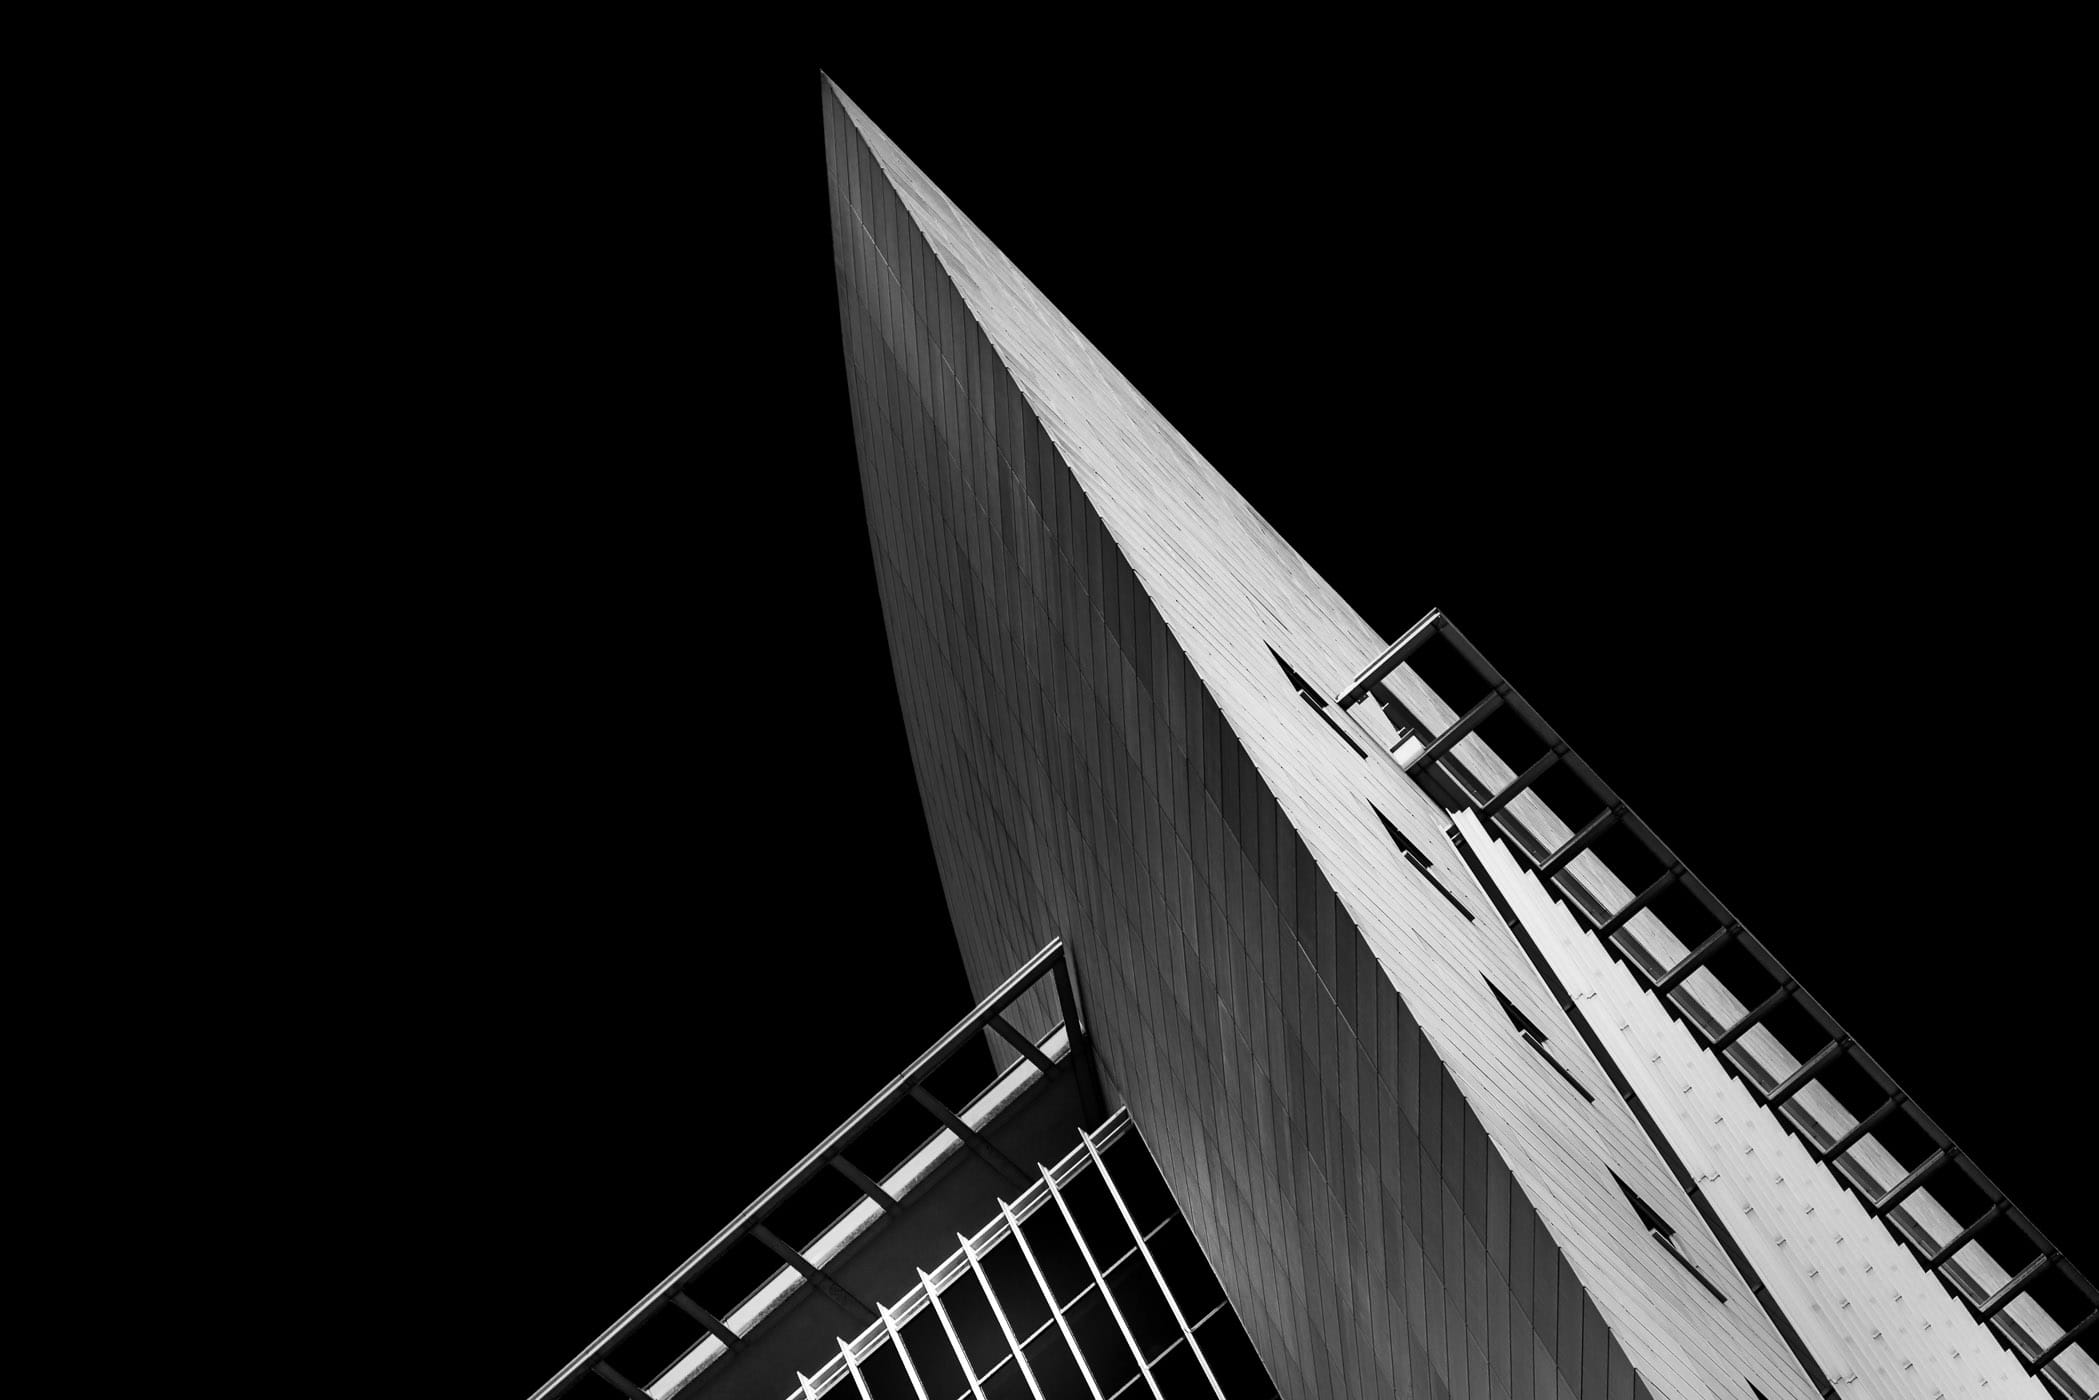 Abstract architectural detail of the Federal Reserve Bank of Dallas.